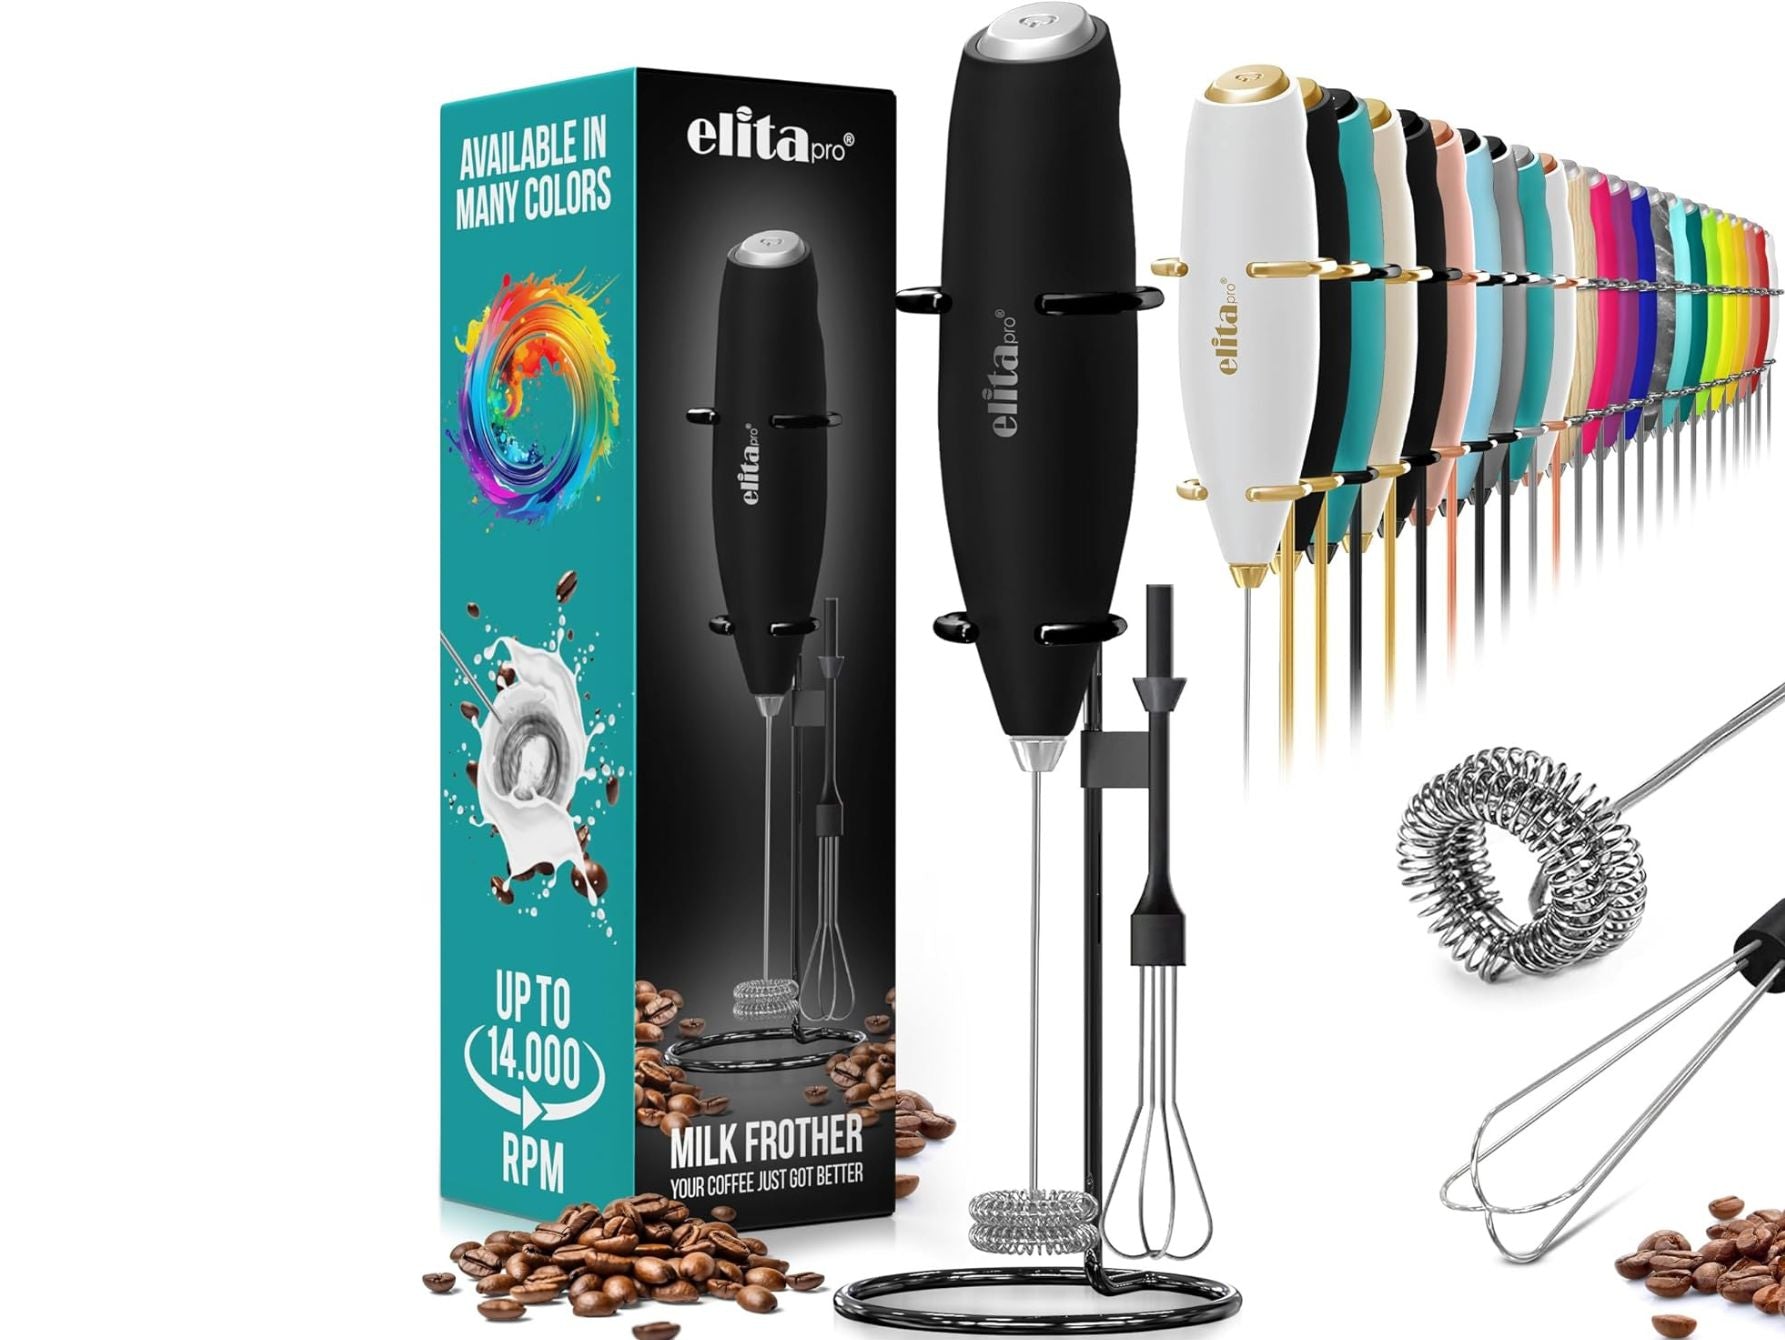 ElitaPro Powerful Milk Frother Wand - 2 in 1 Handheld Coffee Frother and Egg Beater